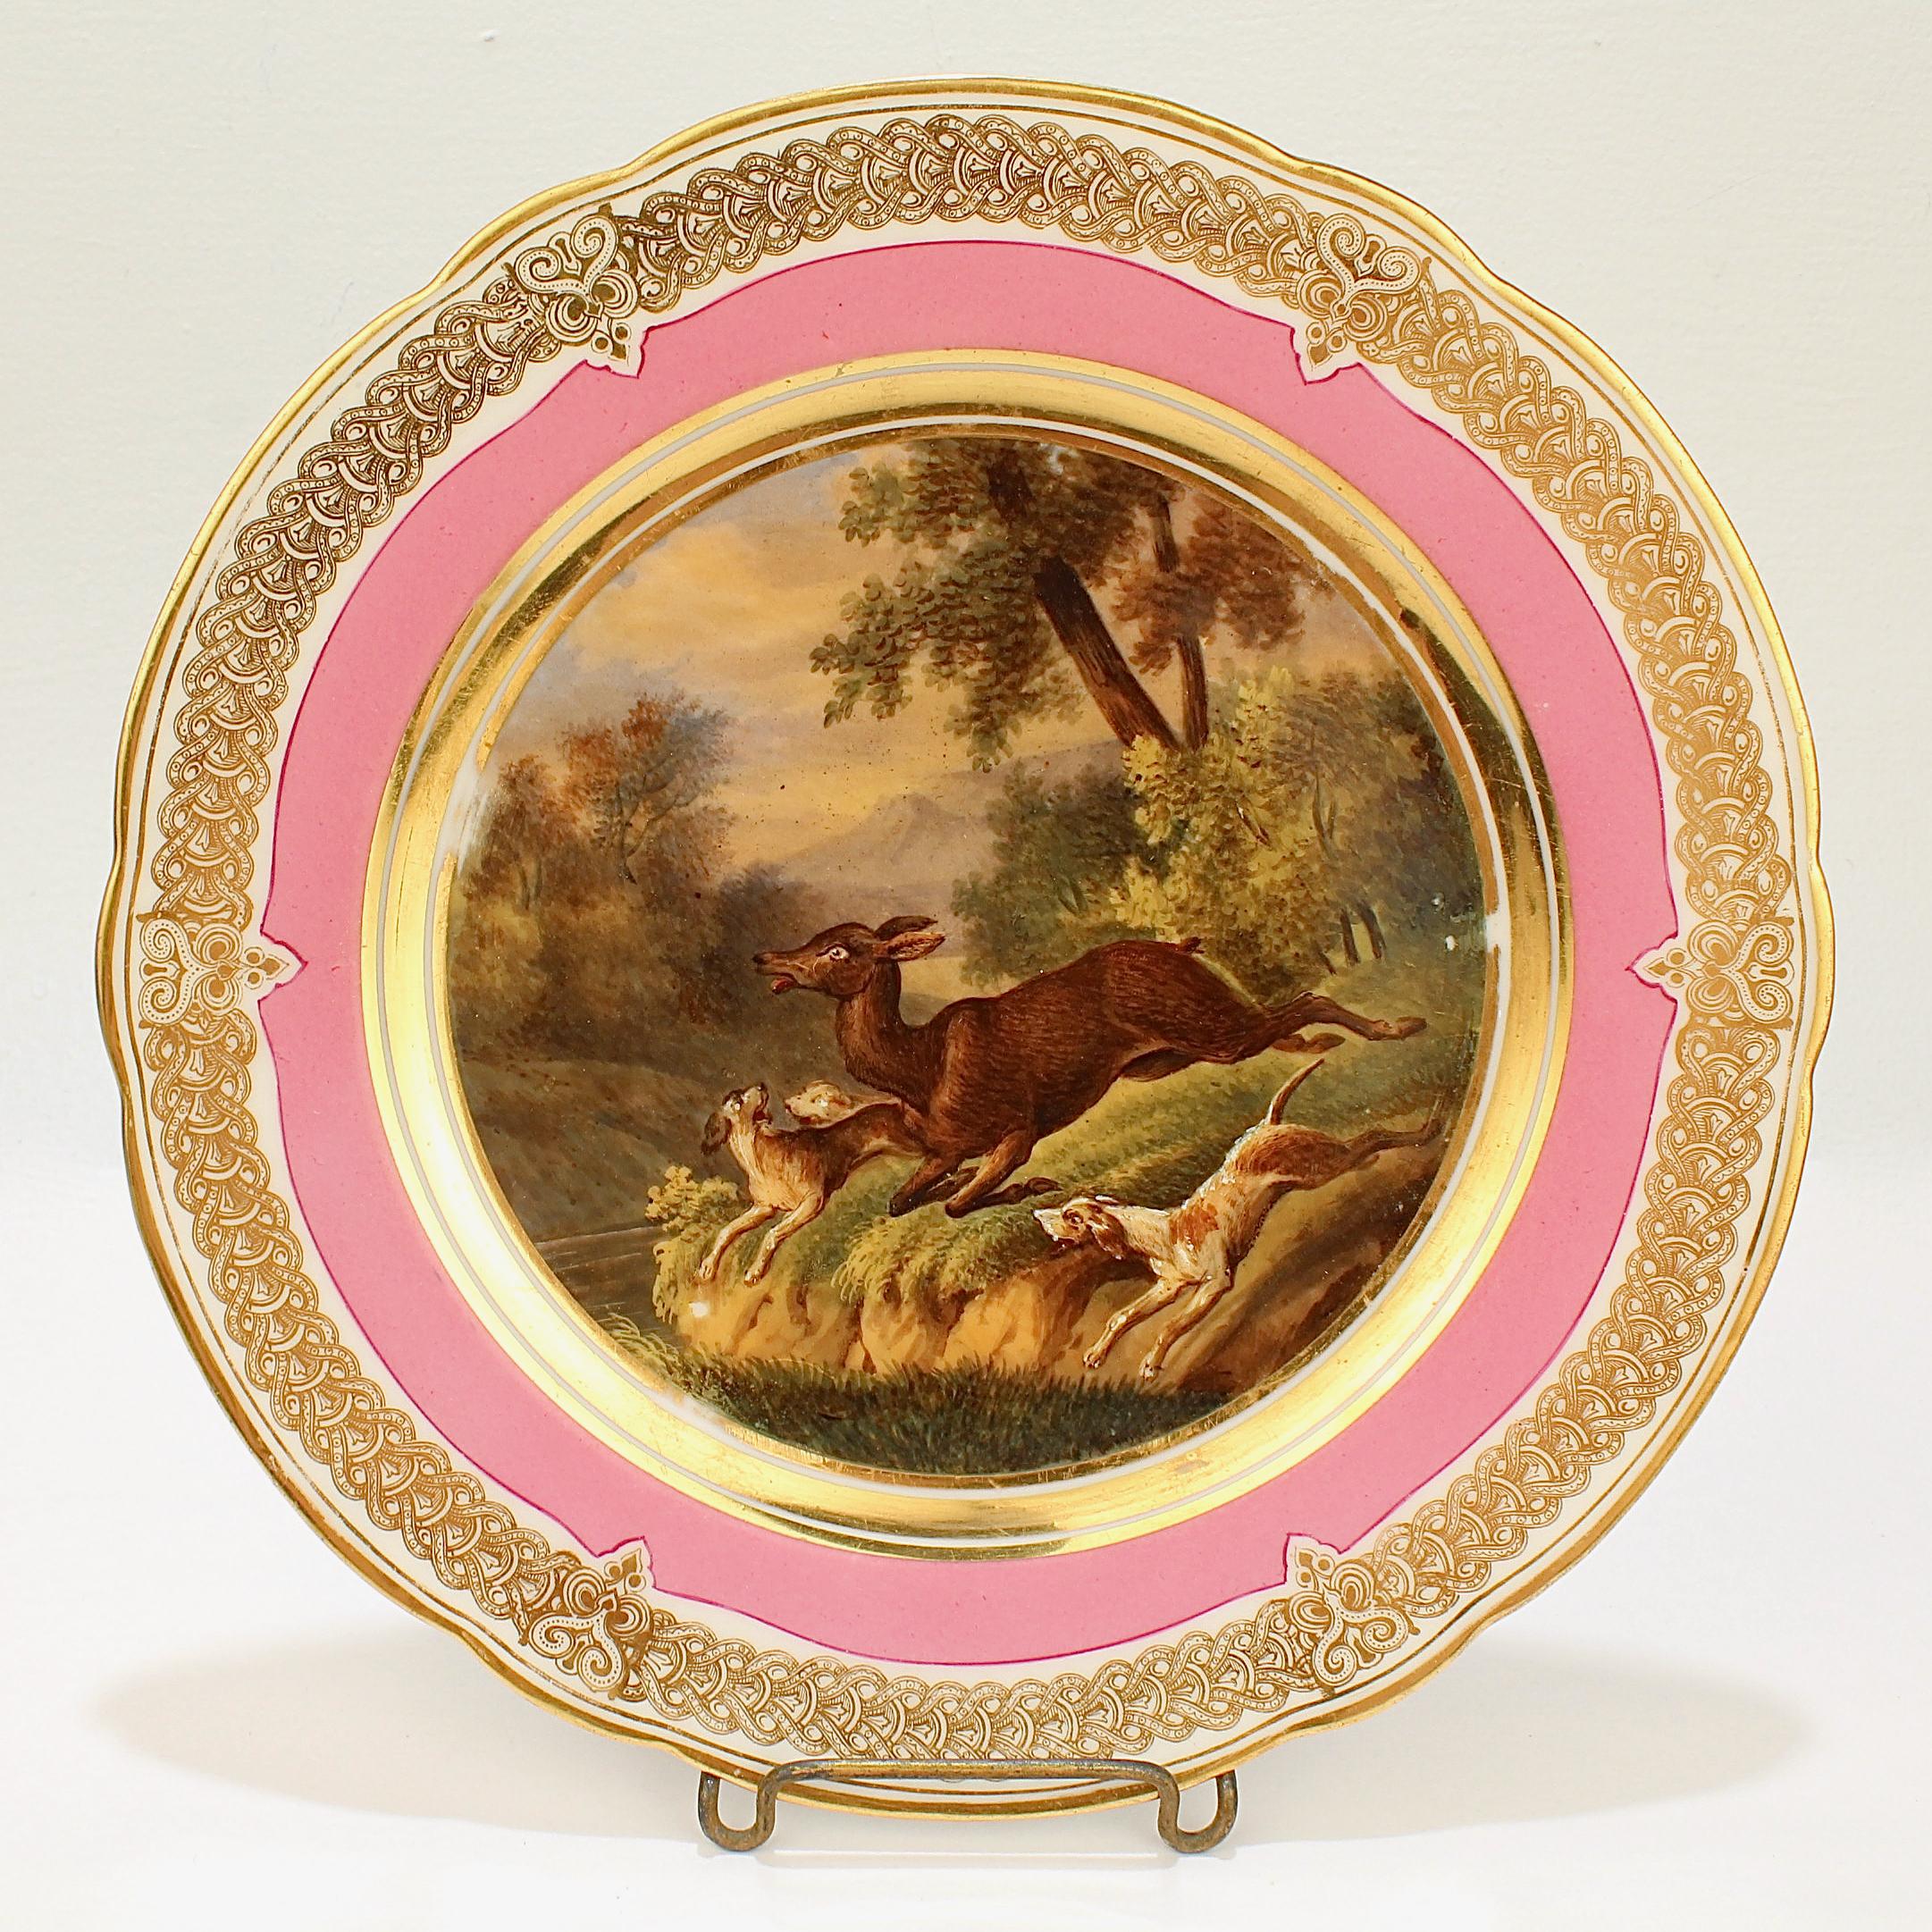 A wonderful antique 19th century Paris porcelain plate.

With a hand painted scene of a hunt scene in a bucolic landscape including a doe and 3 hounds giving chase. 

It has a rich pink border and an elaborate gilt design to the rim and a